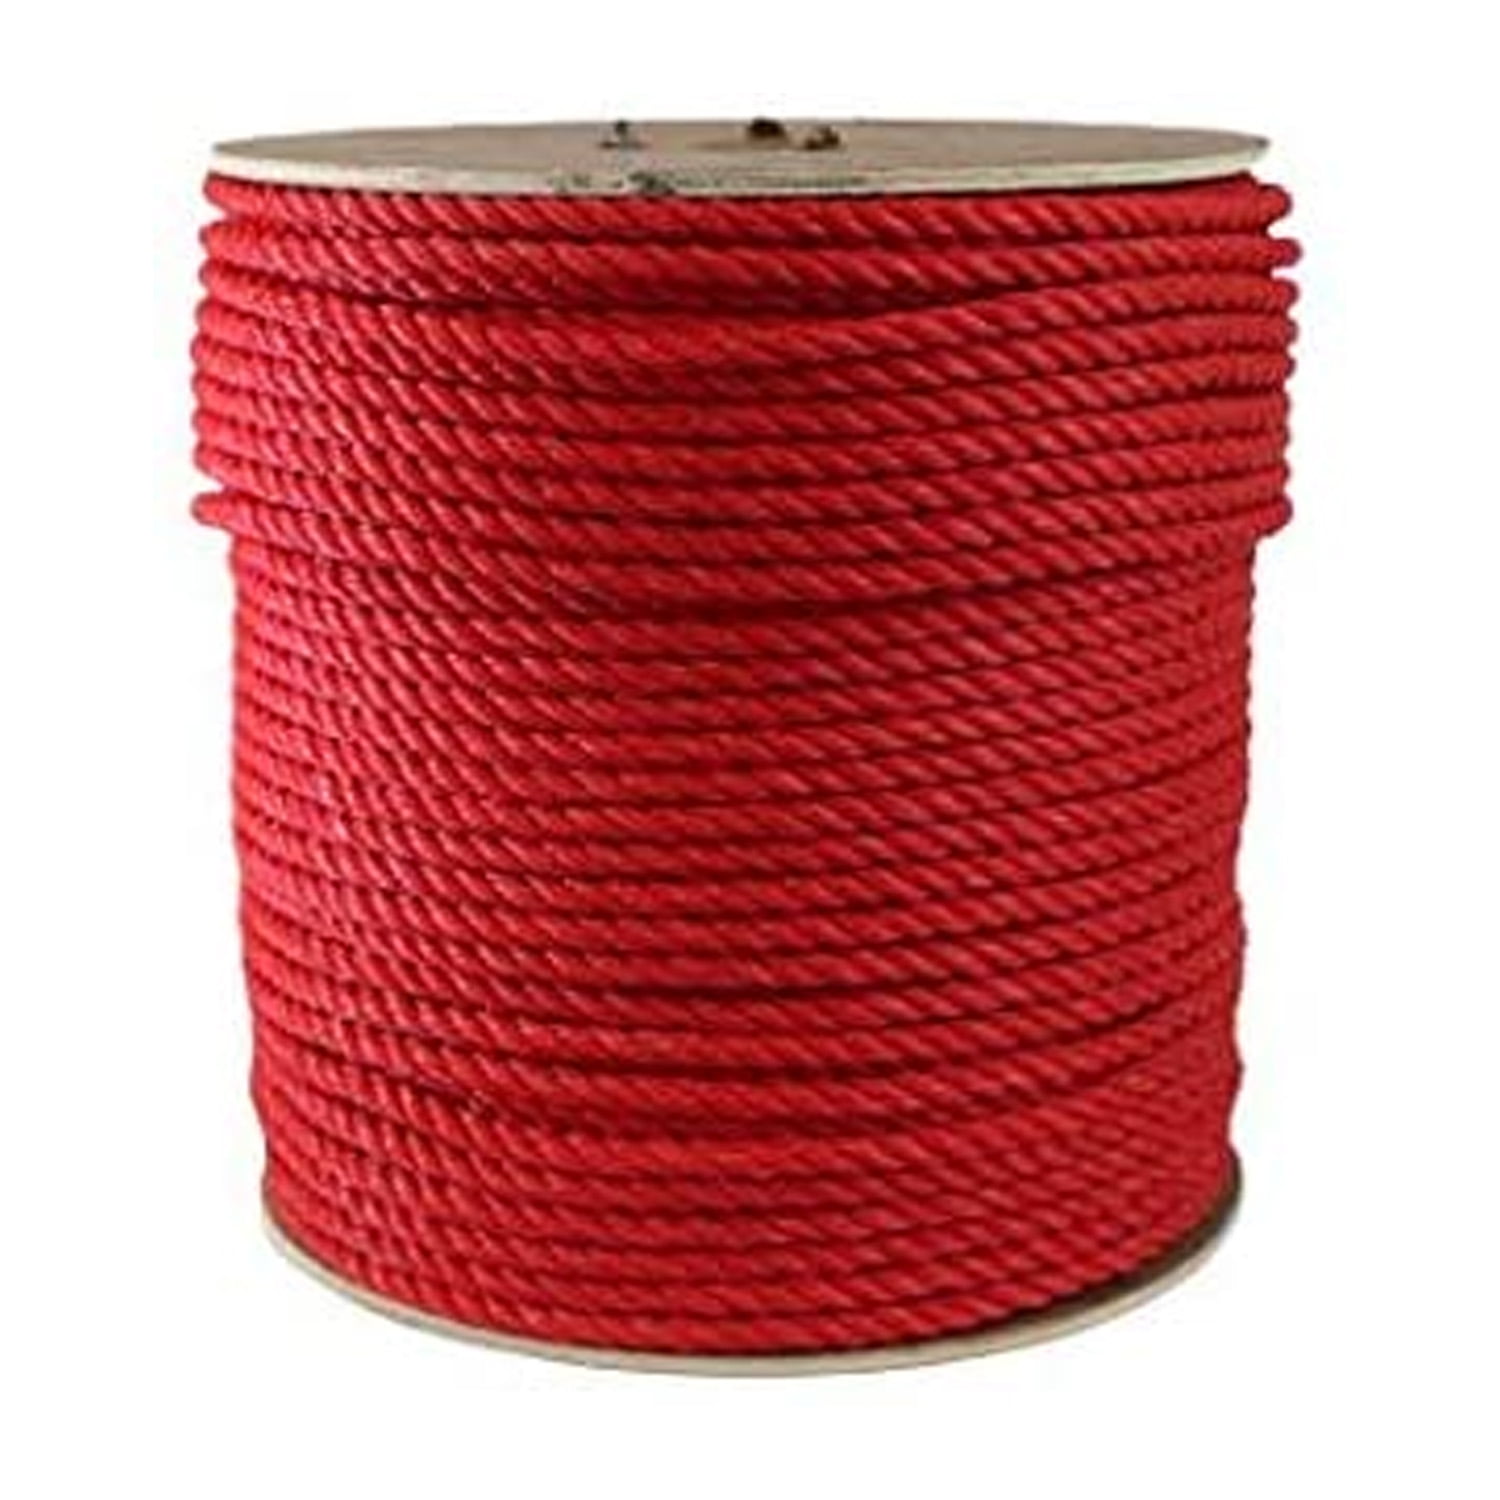 ATERET Twisted 3-Strand Red Polypropylene Rope Monofilament I 5/16